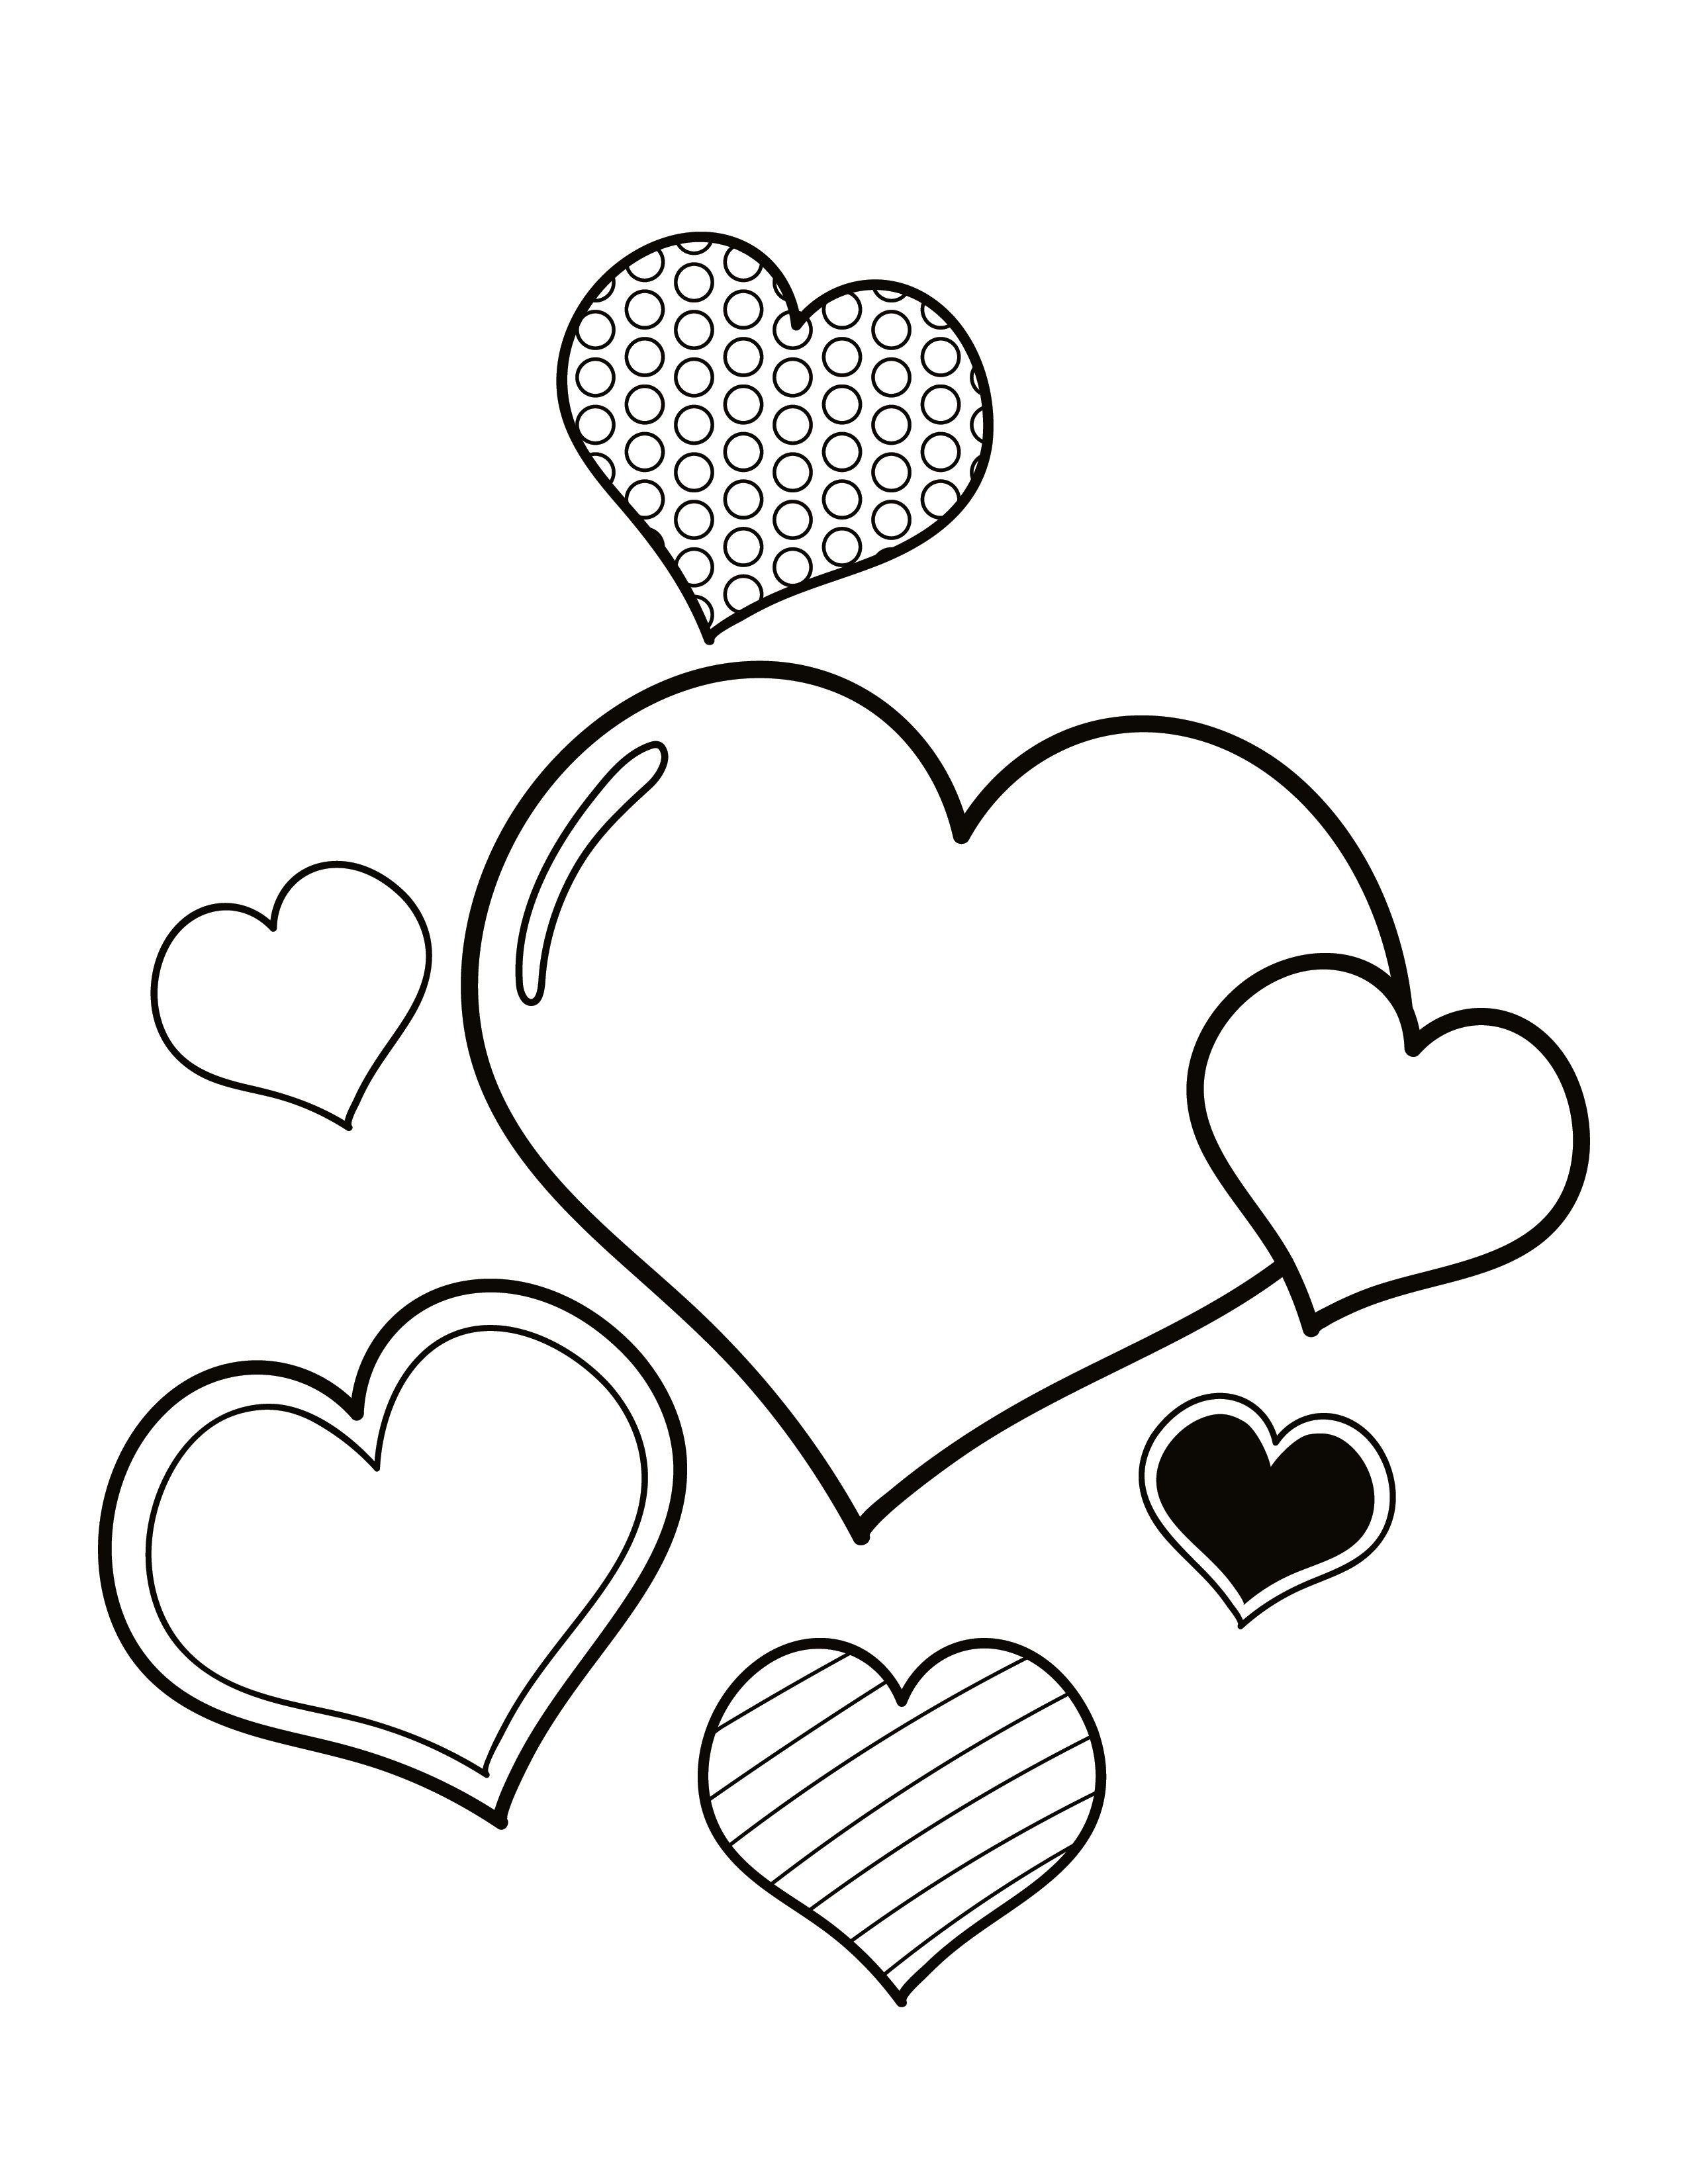 FREE Heart Shaped Rose Coloring Page in EPS, Illustrator, JPG, PNG, PDF